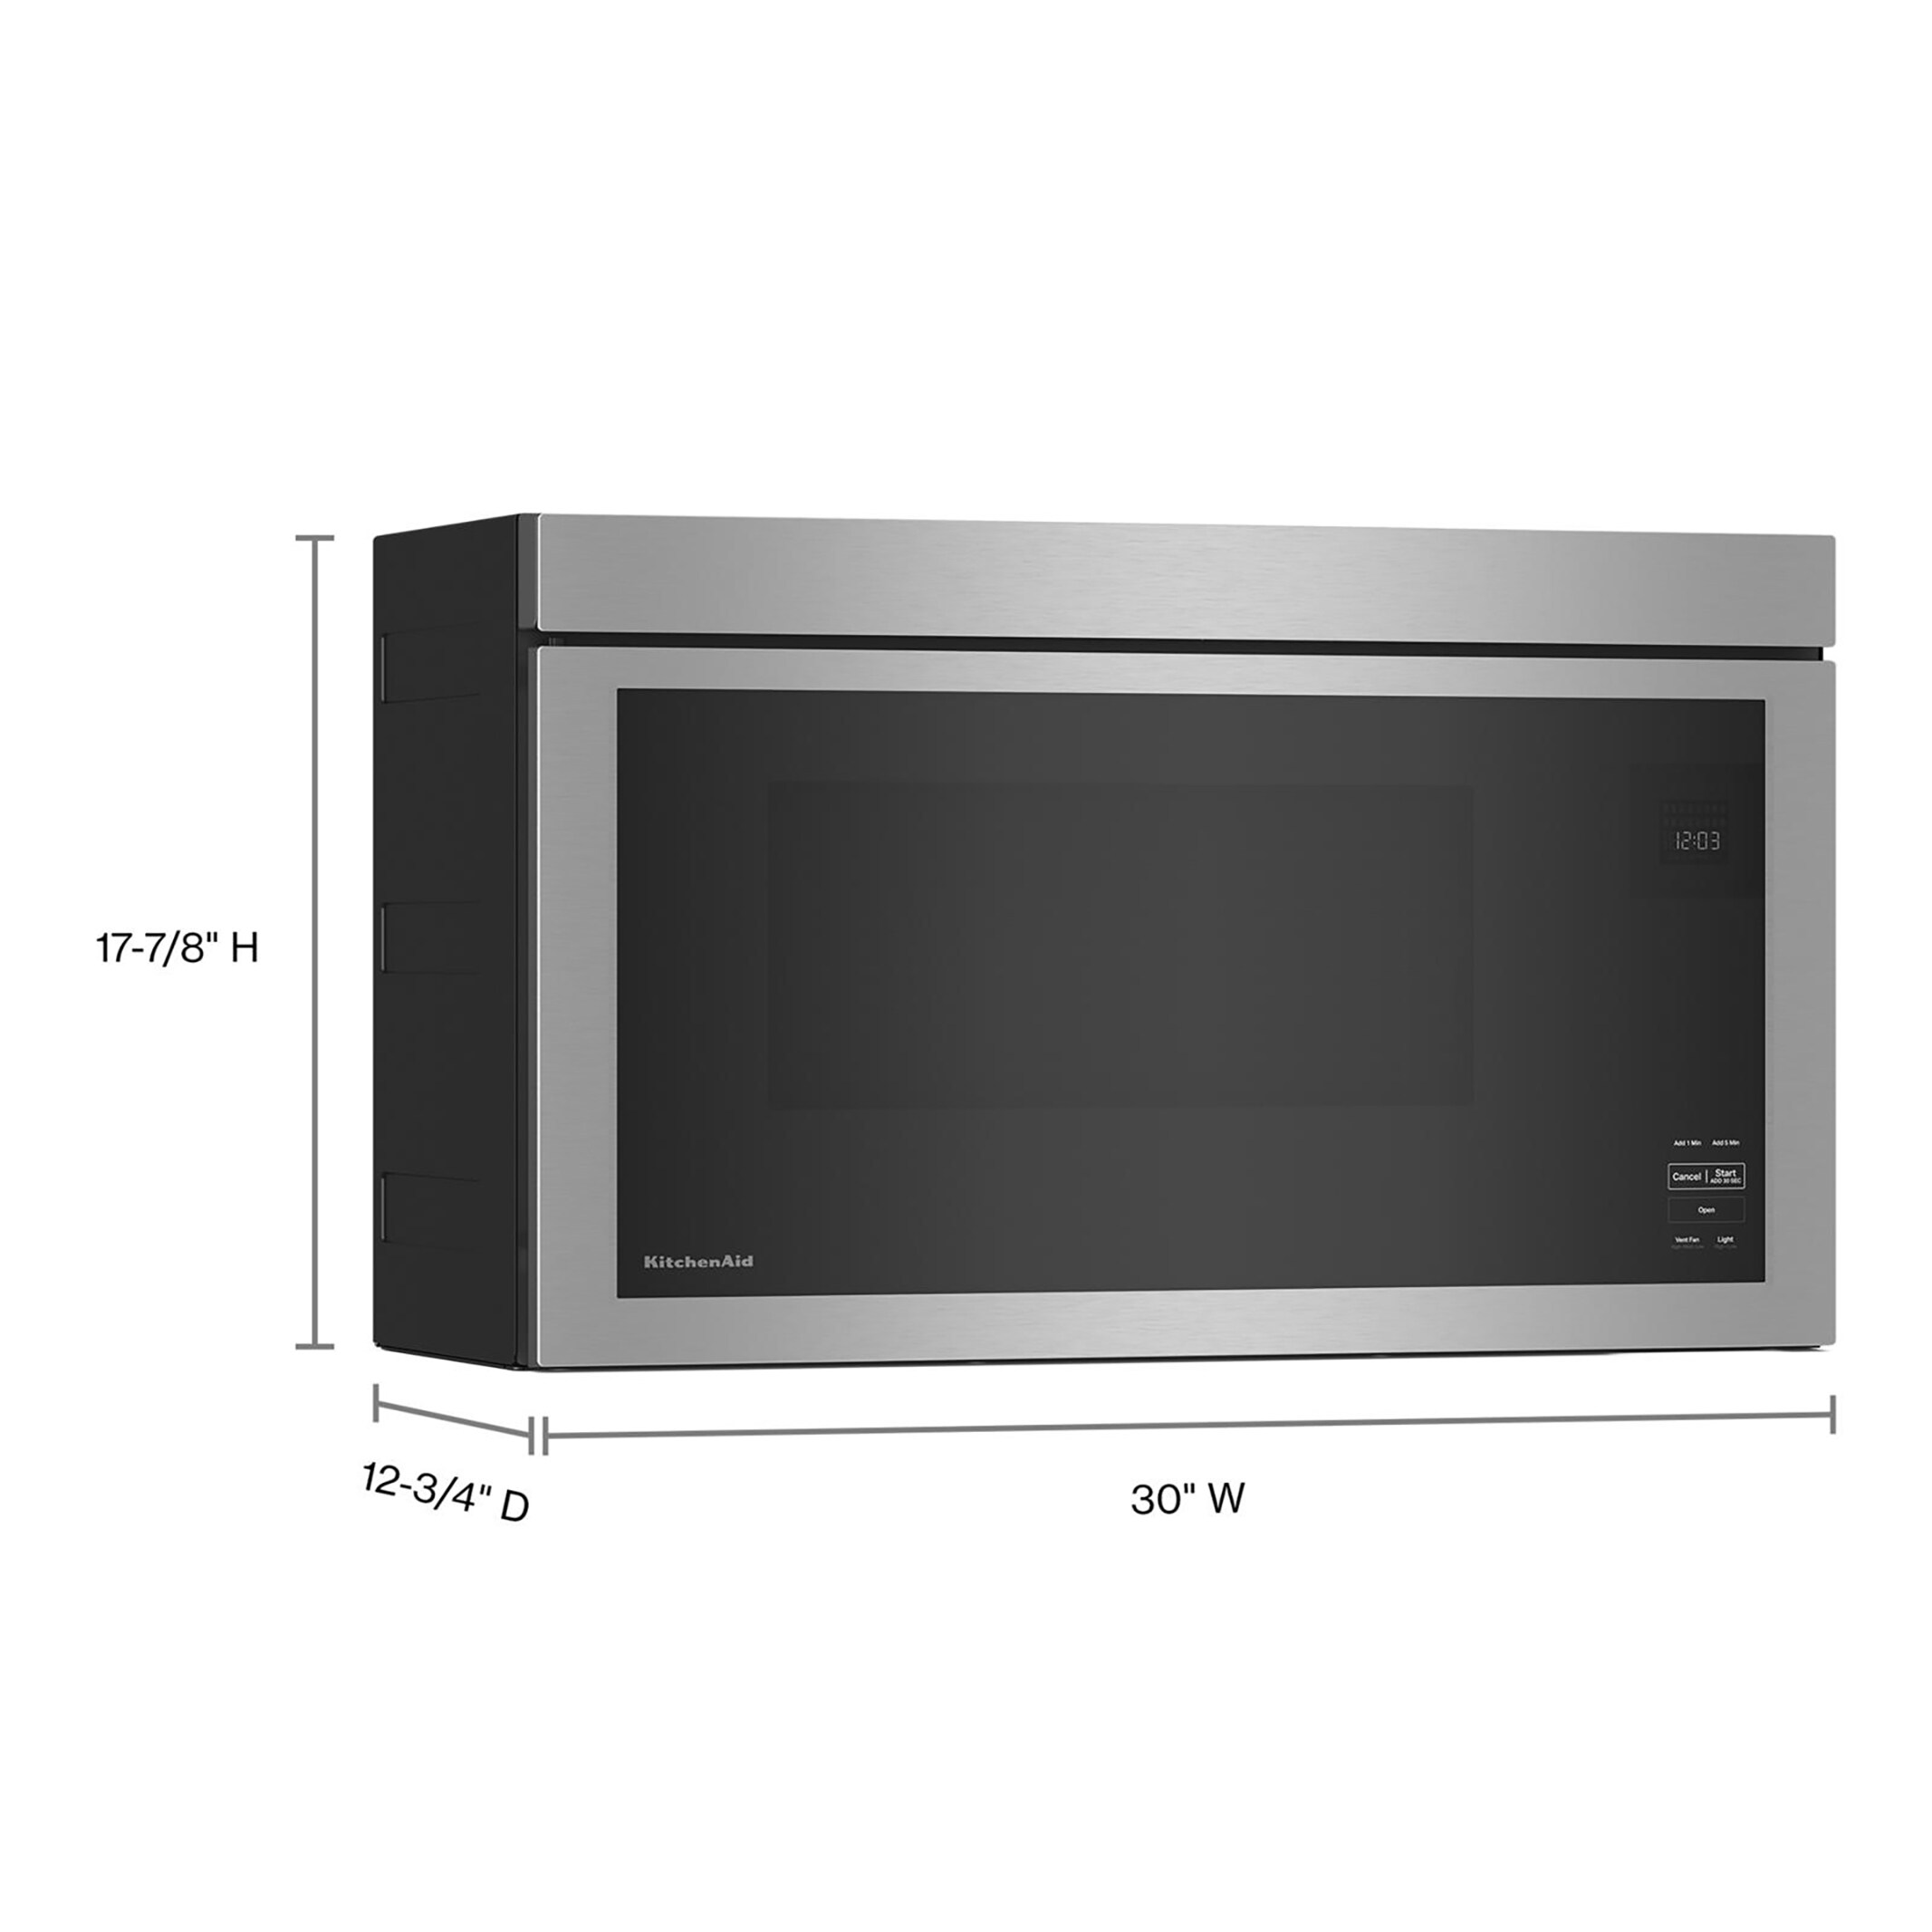 KitchenAid 24 Under-Counter Microwave Oven Drawer in Stainless Steel